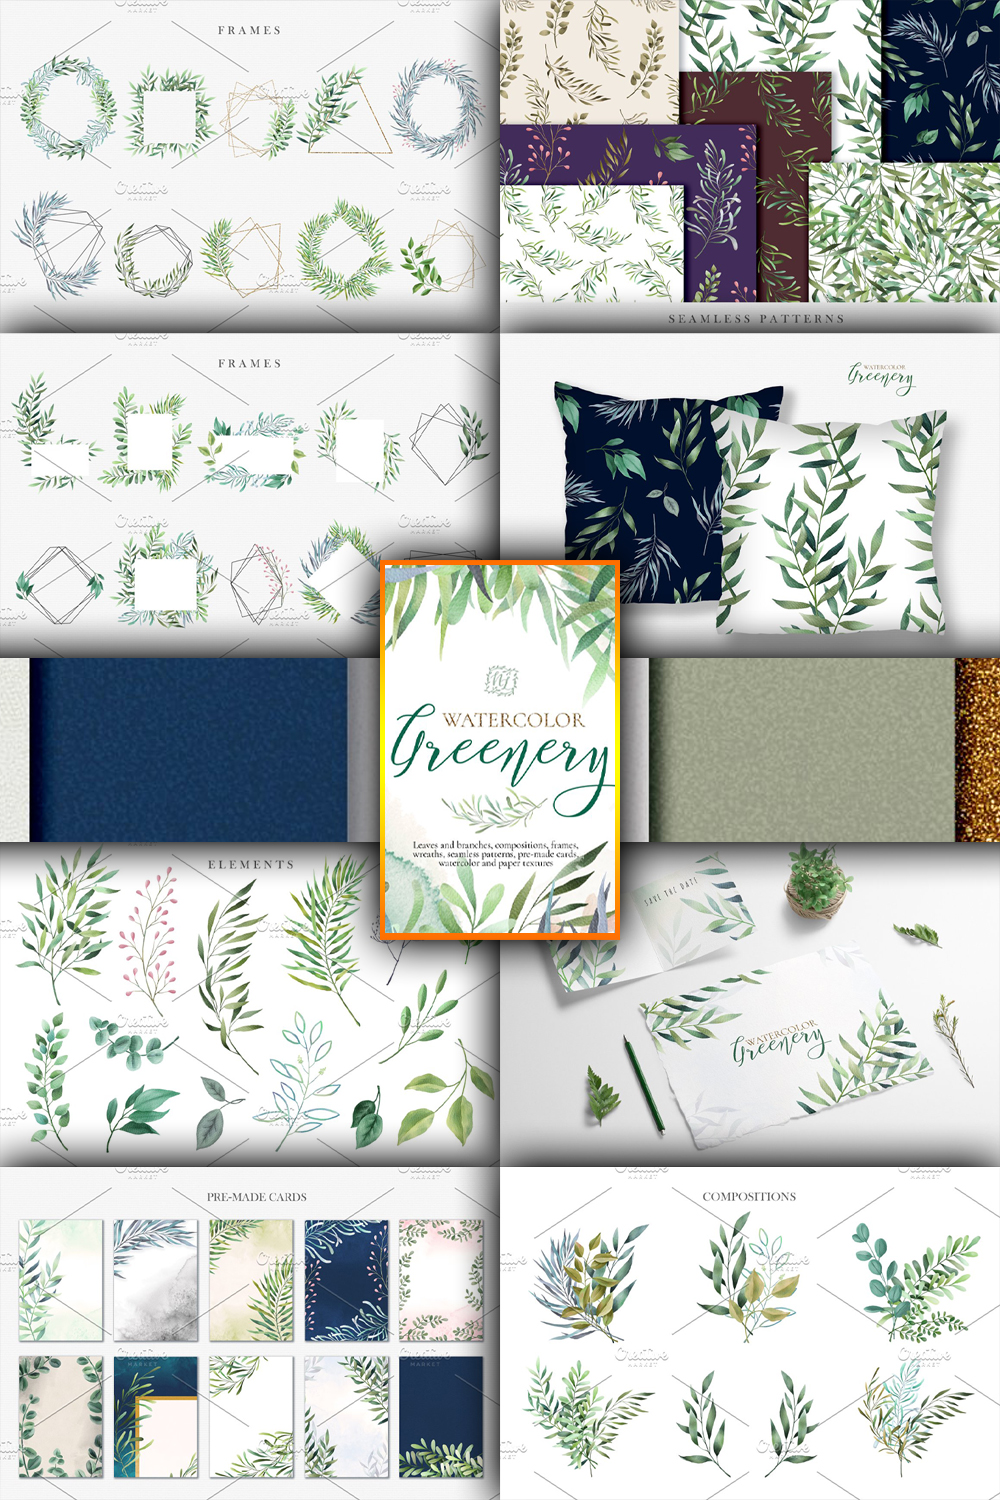 3738285 watercolor greenery collection pinterest 1000 1500 996